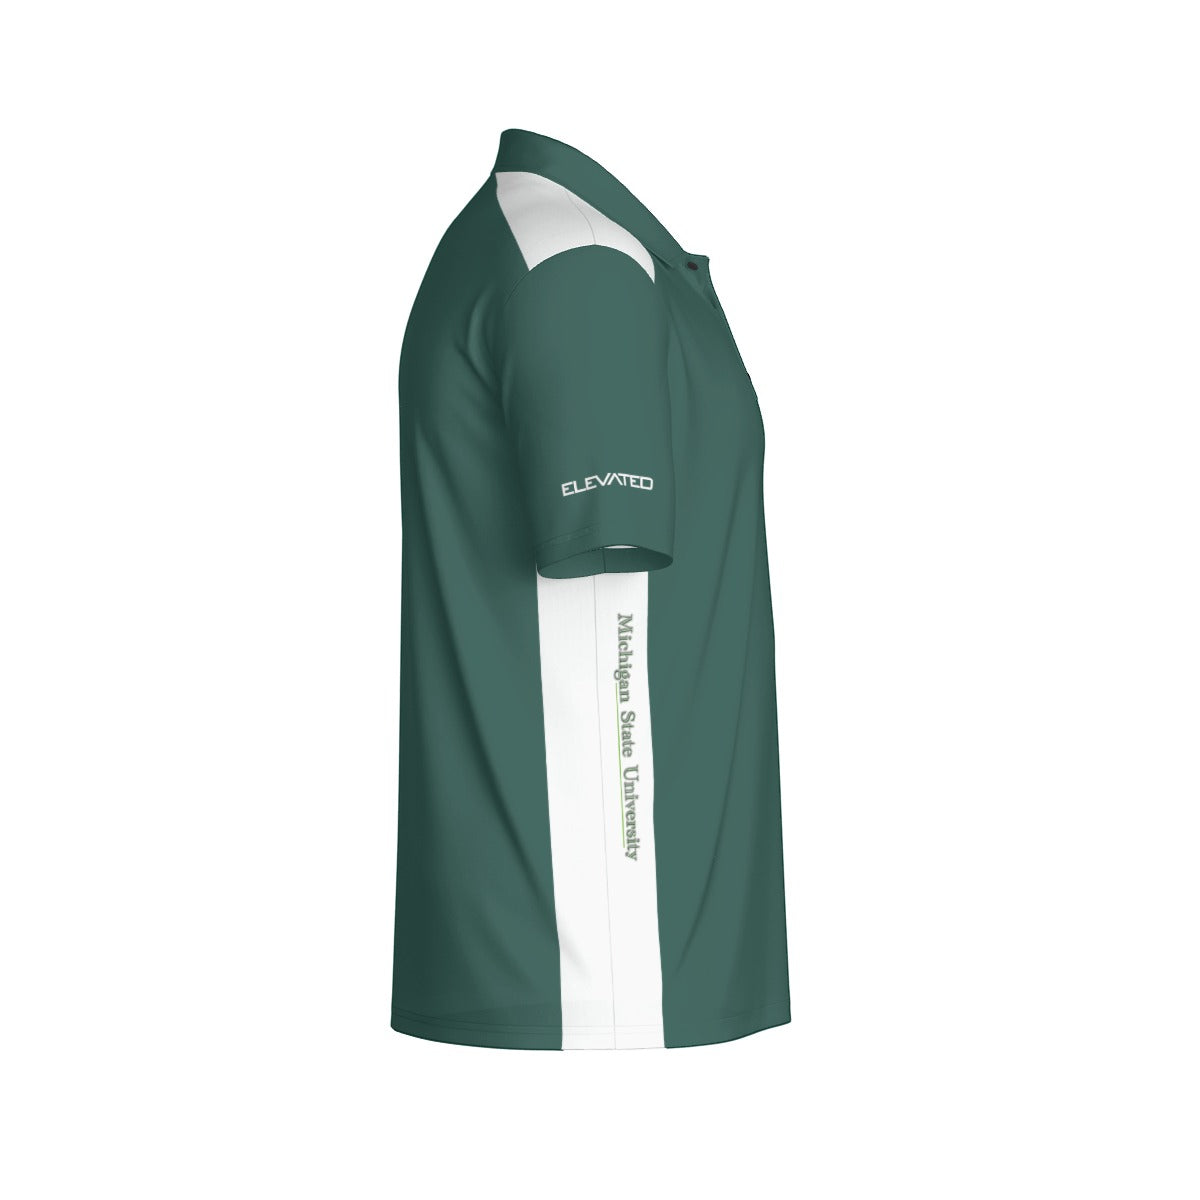 Michigan State Breathable wicking polo